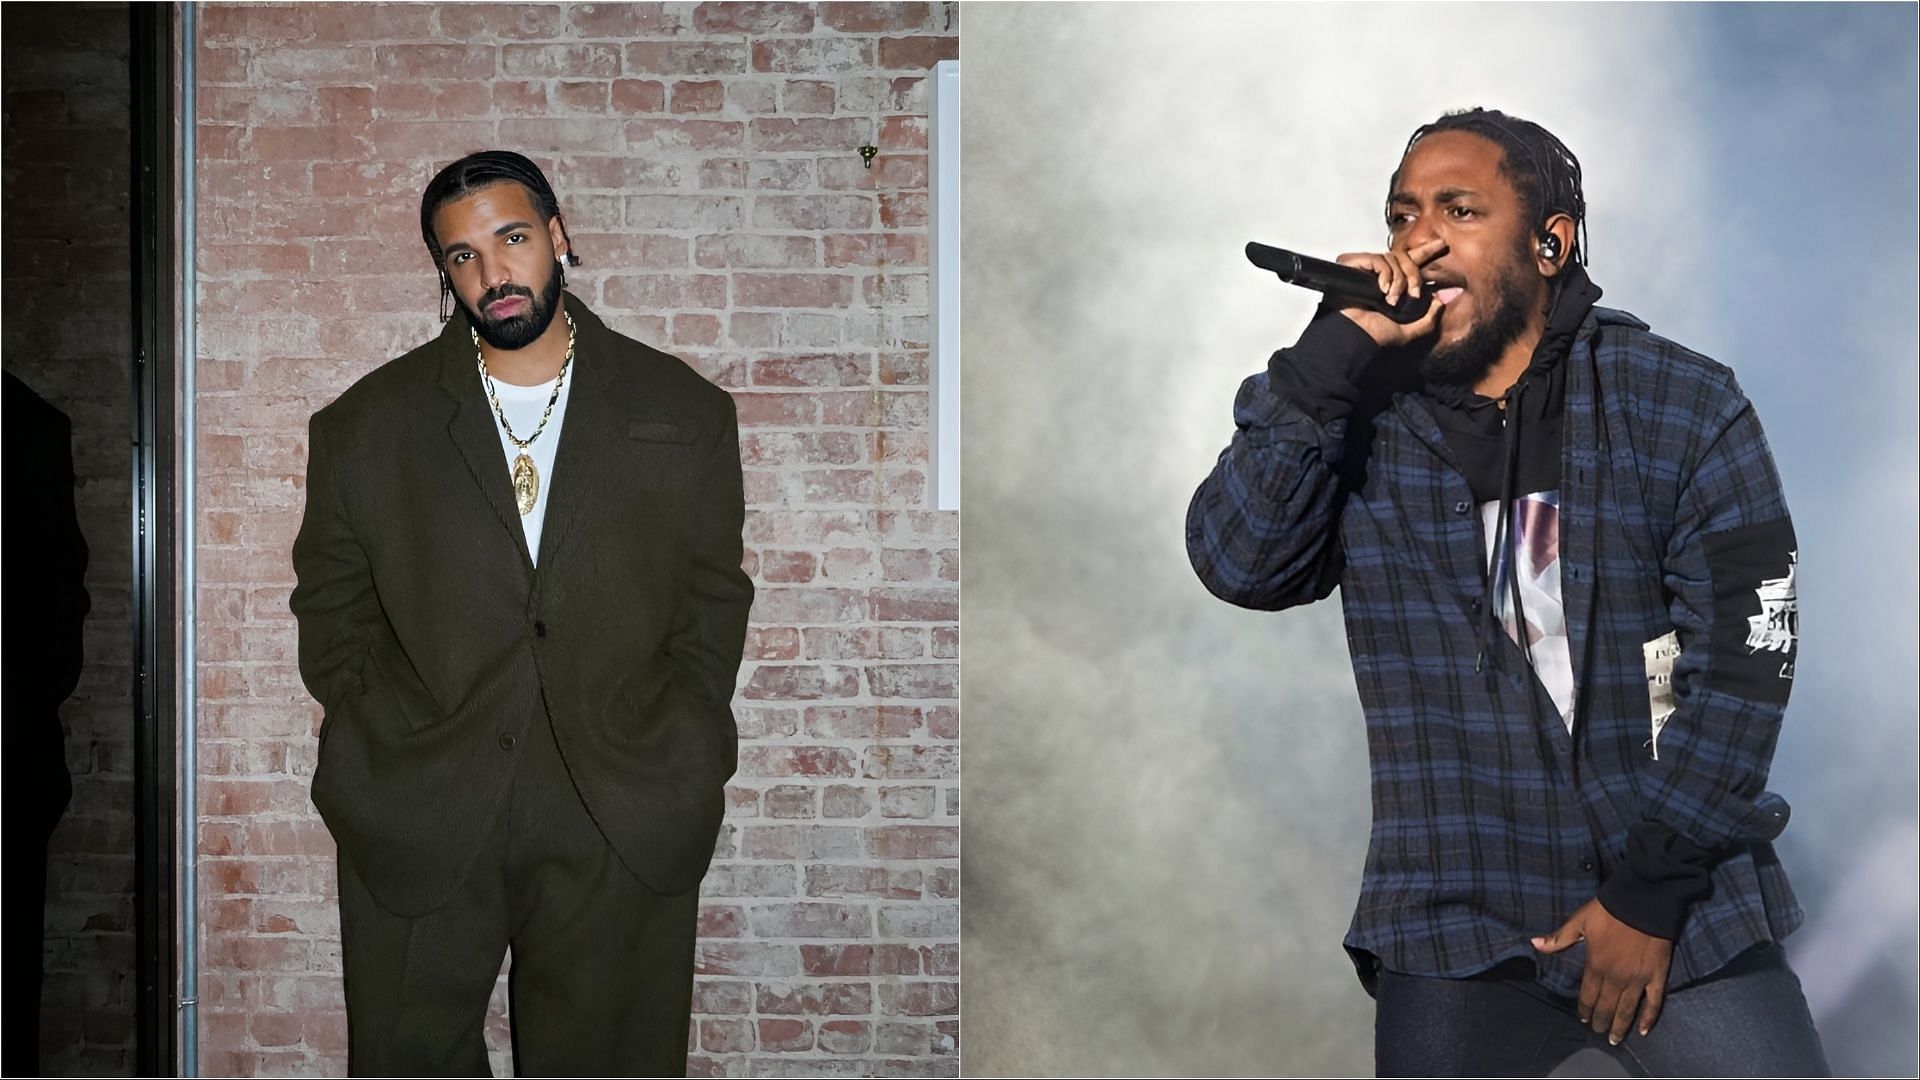 A journalist was criticized by the public after he shared his views on Drake and Kendrick Lamar